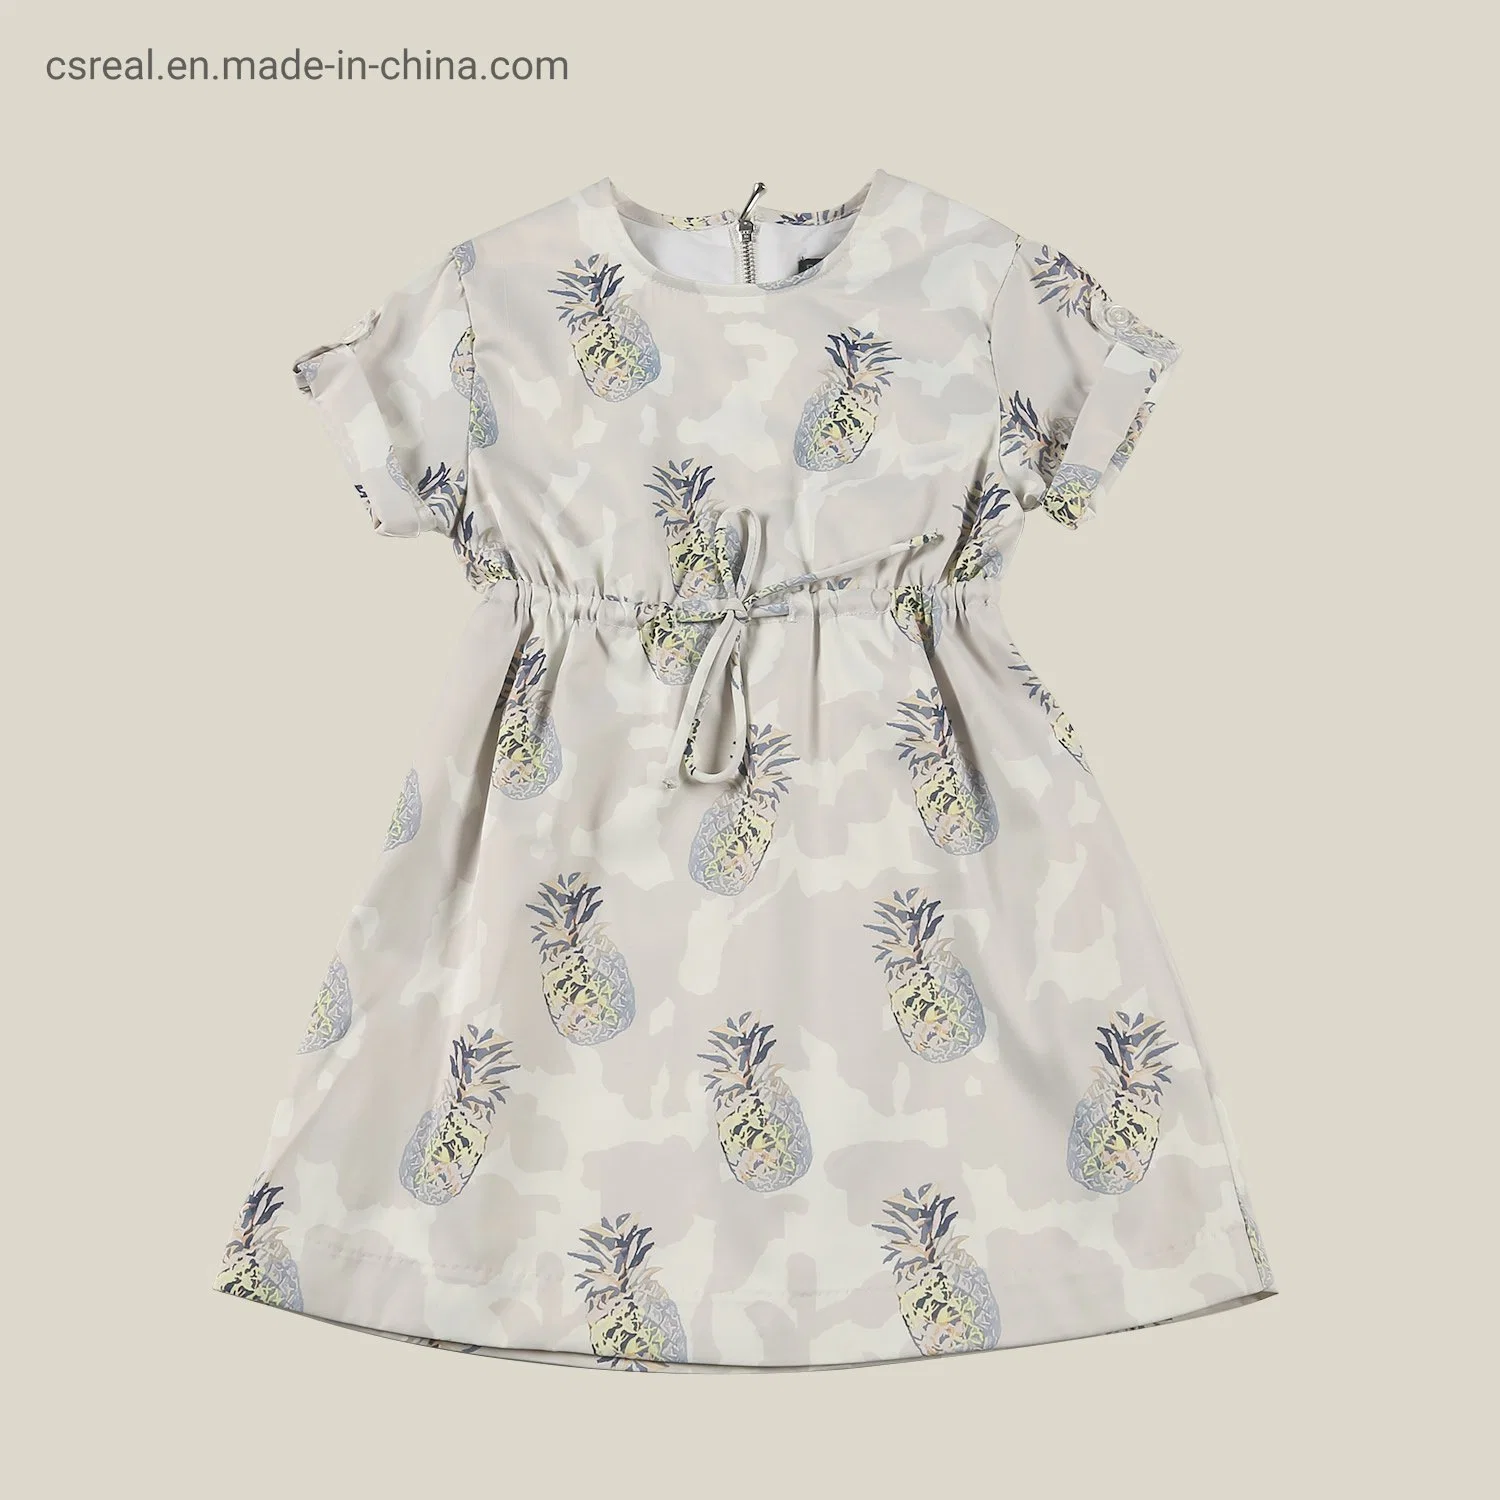 Girl Toddle Kids Fashion Woven Cloud and Pineapple Print Dress Wear